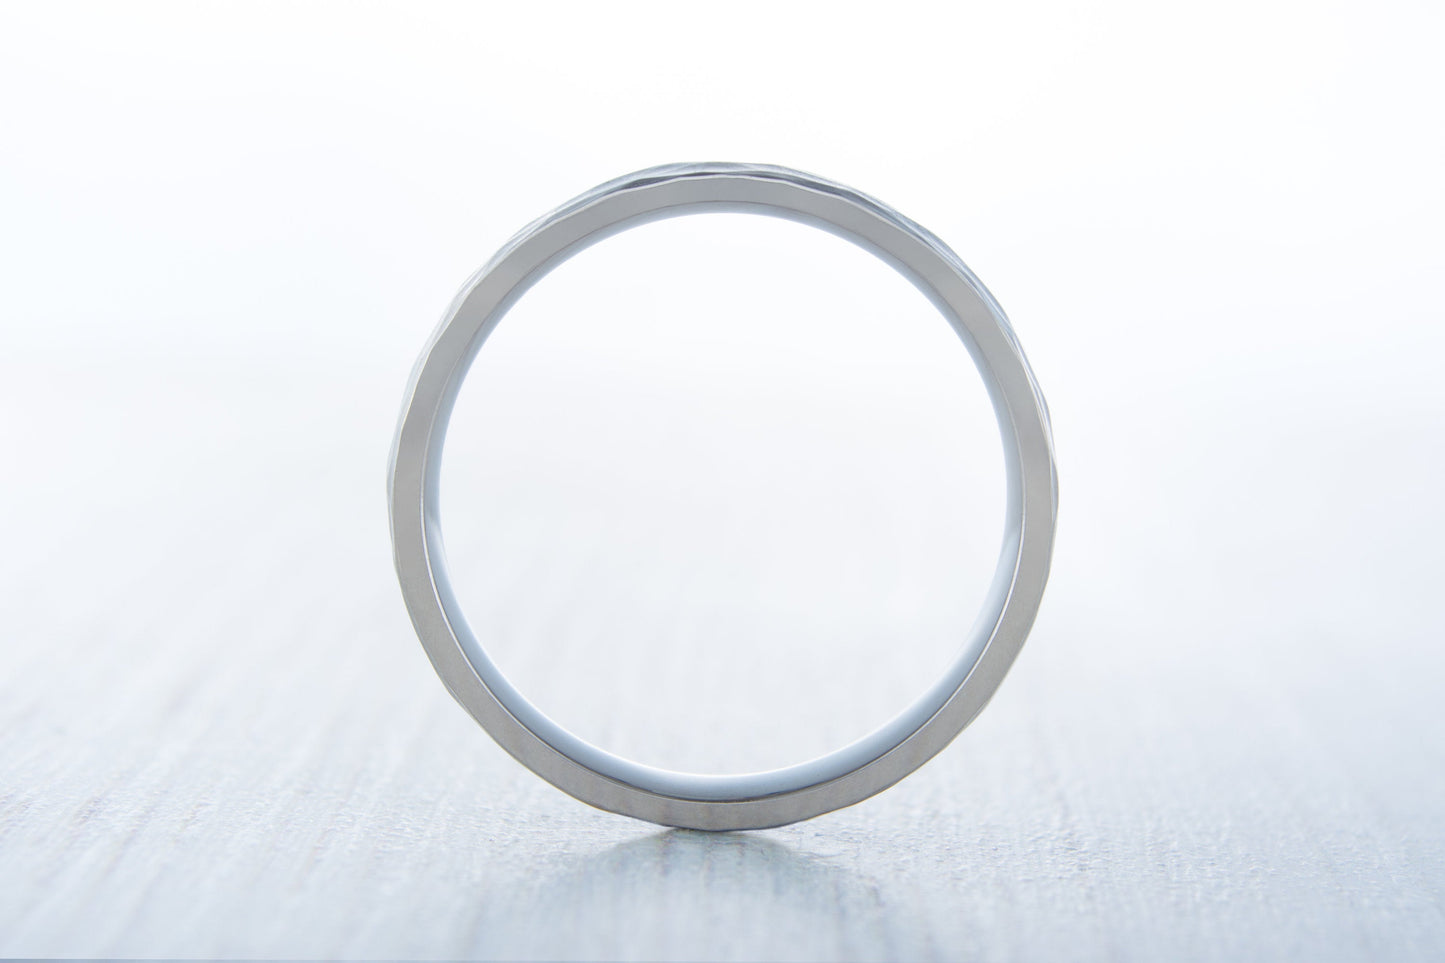 4mm Hammered finish Titanium Wedding ring band for men and women